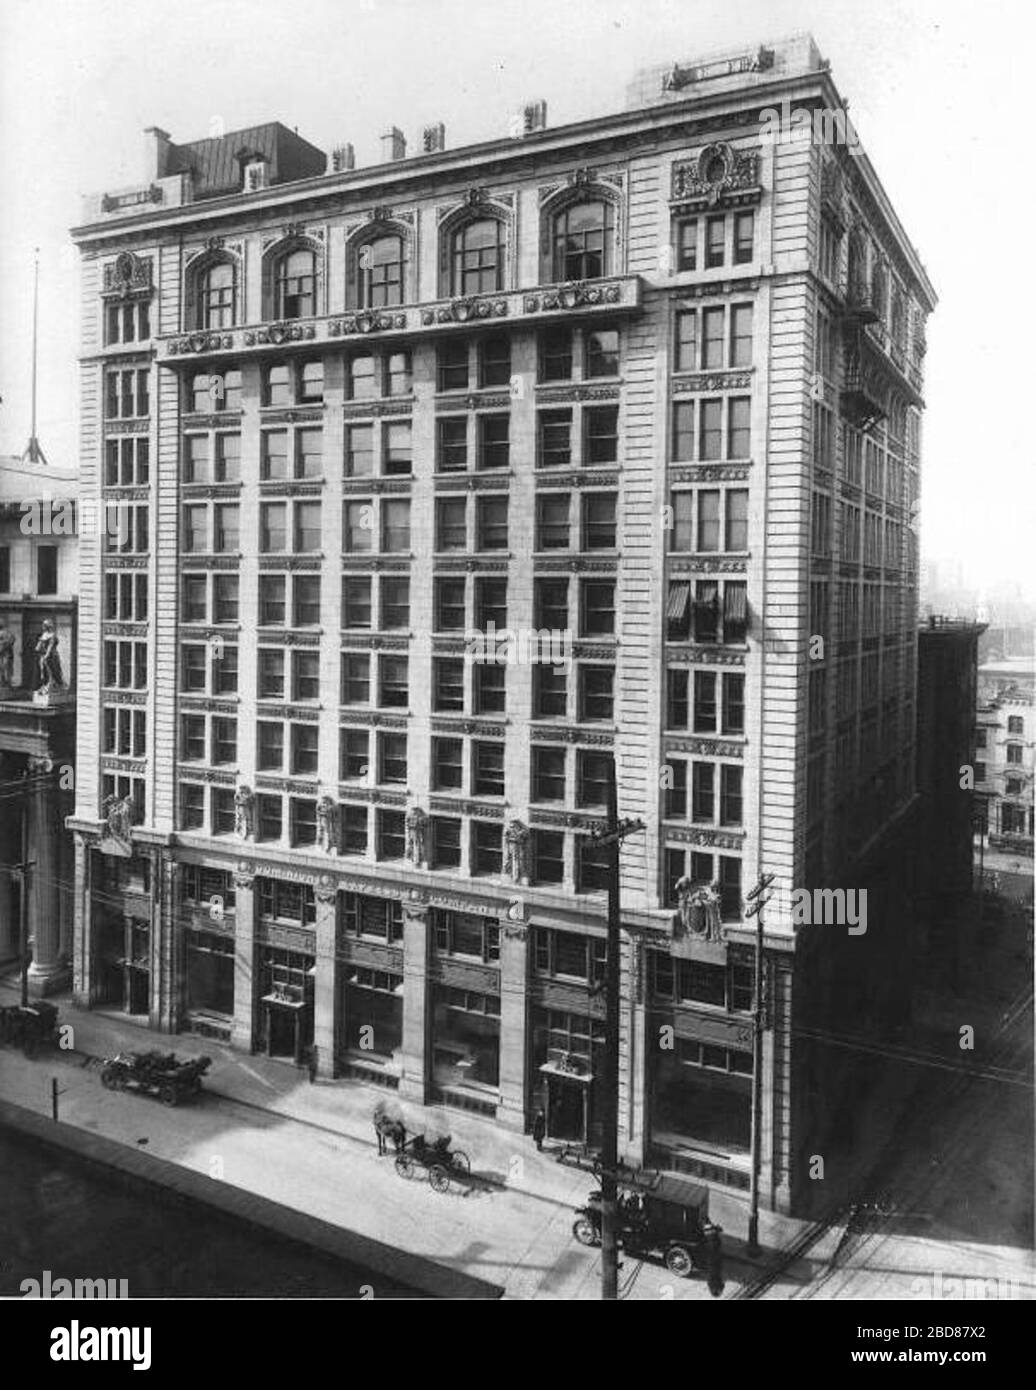 'English: Photograph, Dominion Express Building, St. James Street, Montreal, QC, 1912, Wm. Notman & Son, Silver salts on paper - Gelatin silver process - 25 x 20 cm Français : Photographie, Immeuble de la Dominion Express, rue Saint-Jacques, Montréal, QC, 1912, Wm. Notman & Son, Gélatine argentique, 25 x 20 cm; 1912; This image is available from the McCord Museum under the access number VIEW-12552.1  This tag does not indicate the copyright status of the attached work. A normal copyright tag is still required. See Commons:Licensing for more information.   Deutsch | English | español | suomi | Stock Photo